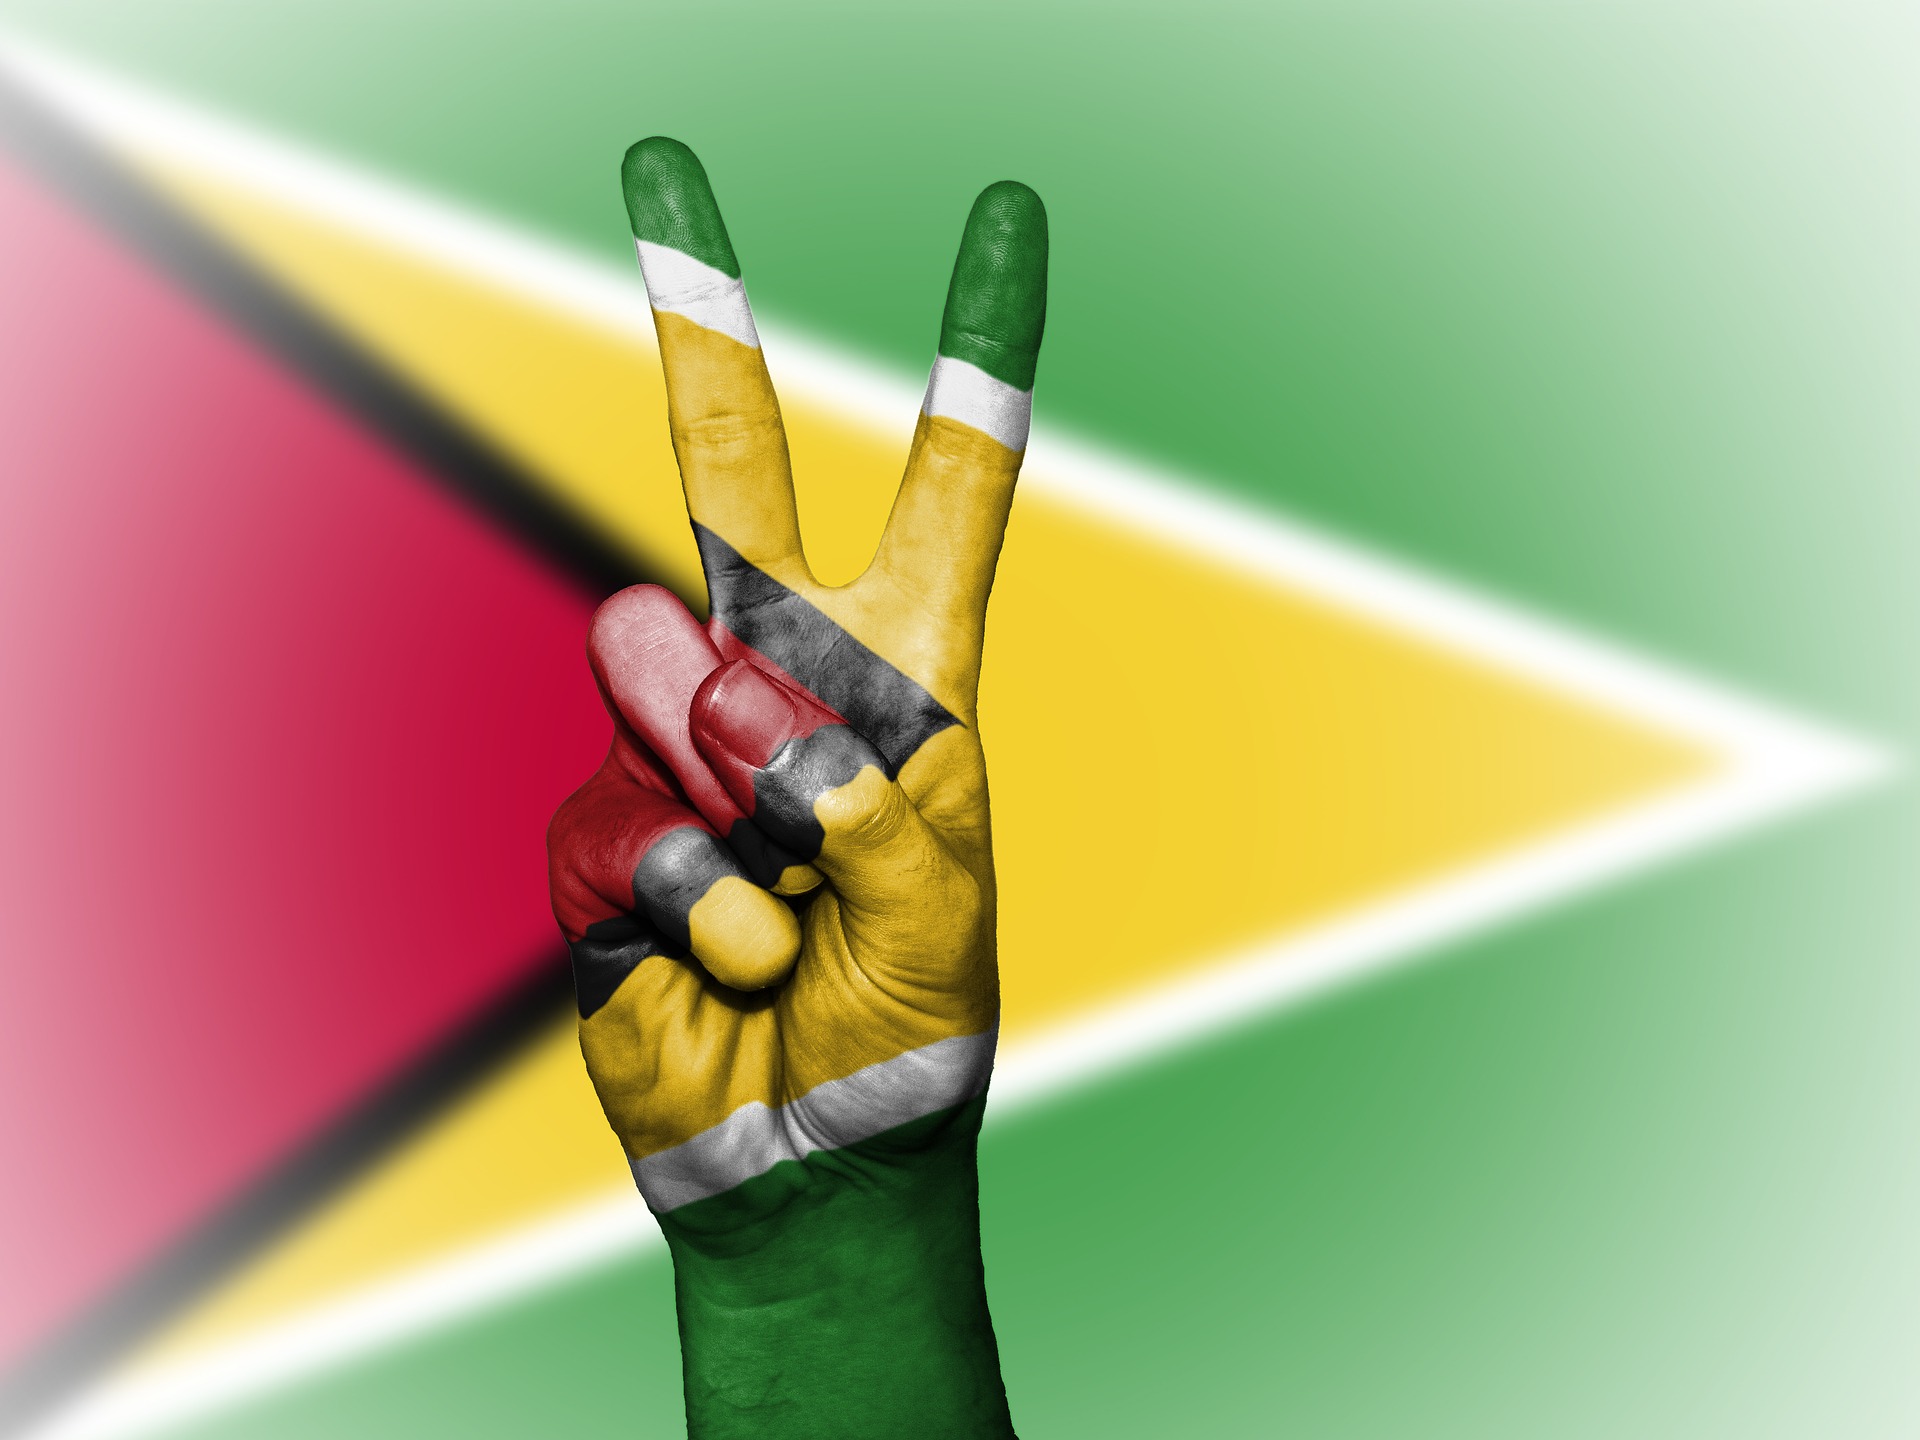 The flag of Guyana (Photo credit: Flickr)